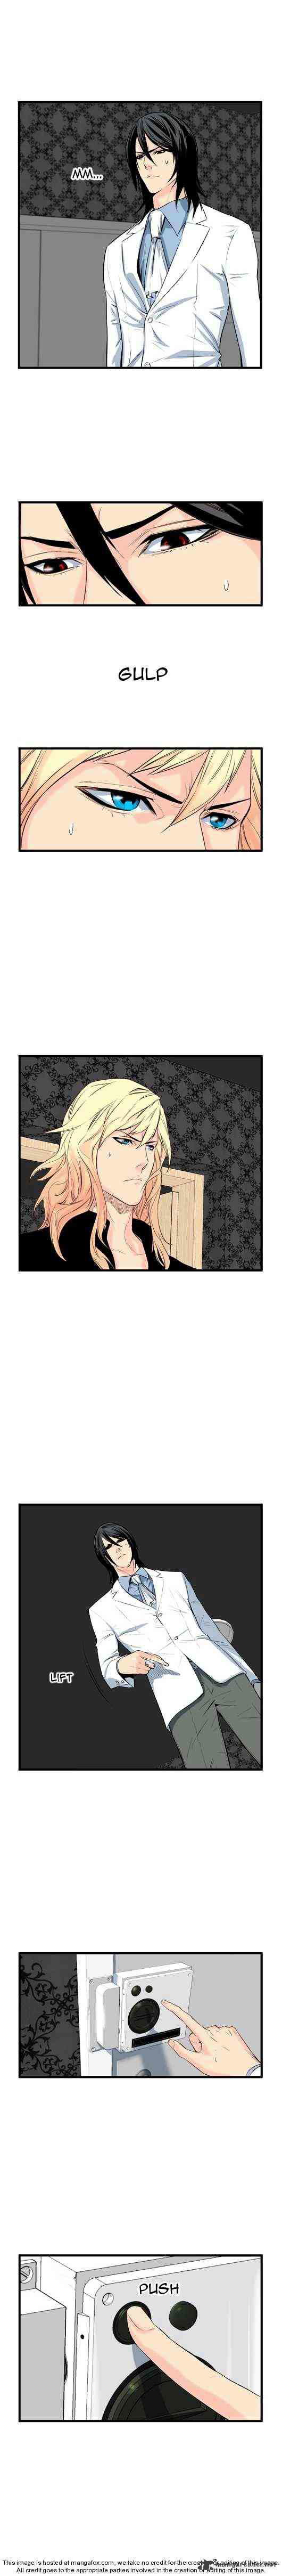 Noblesse Chapter 46 _ Chapters 46-60 page 31